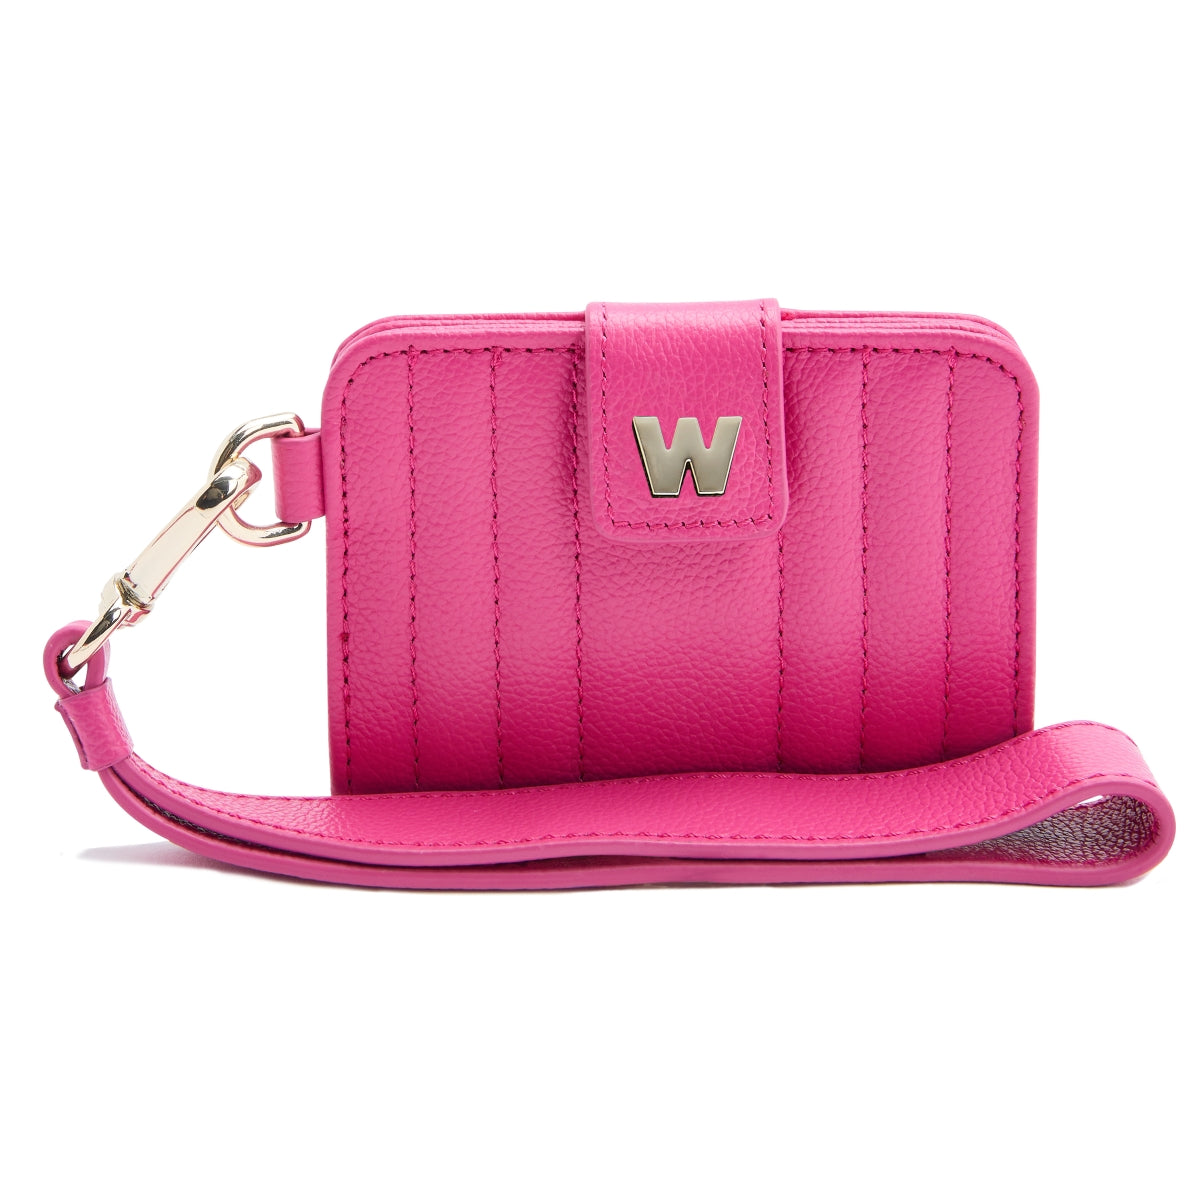 Wolf Mimi Collection Leather Pink Credit Card Holder with Wristlet - Pink